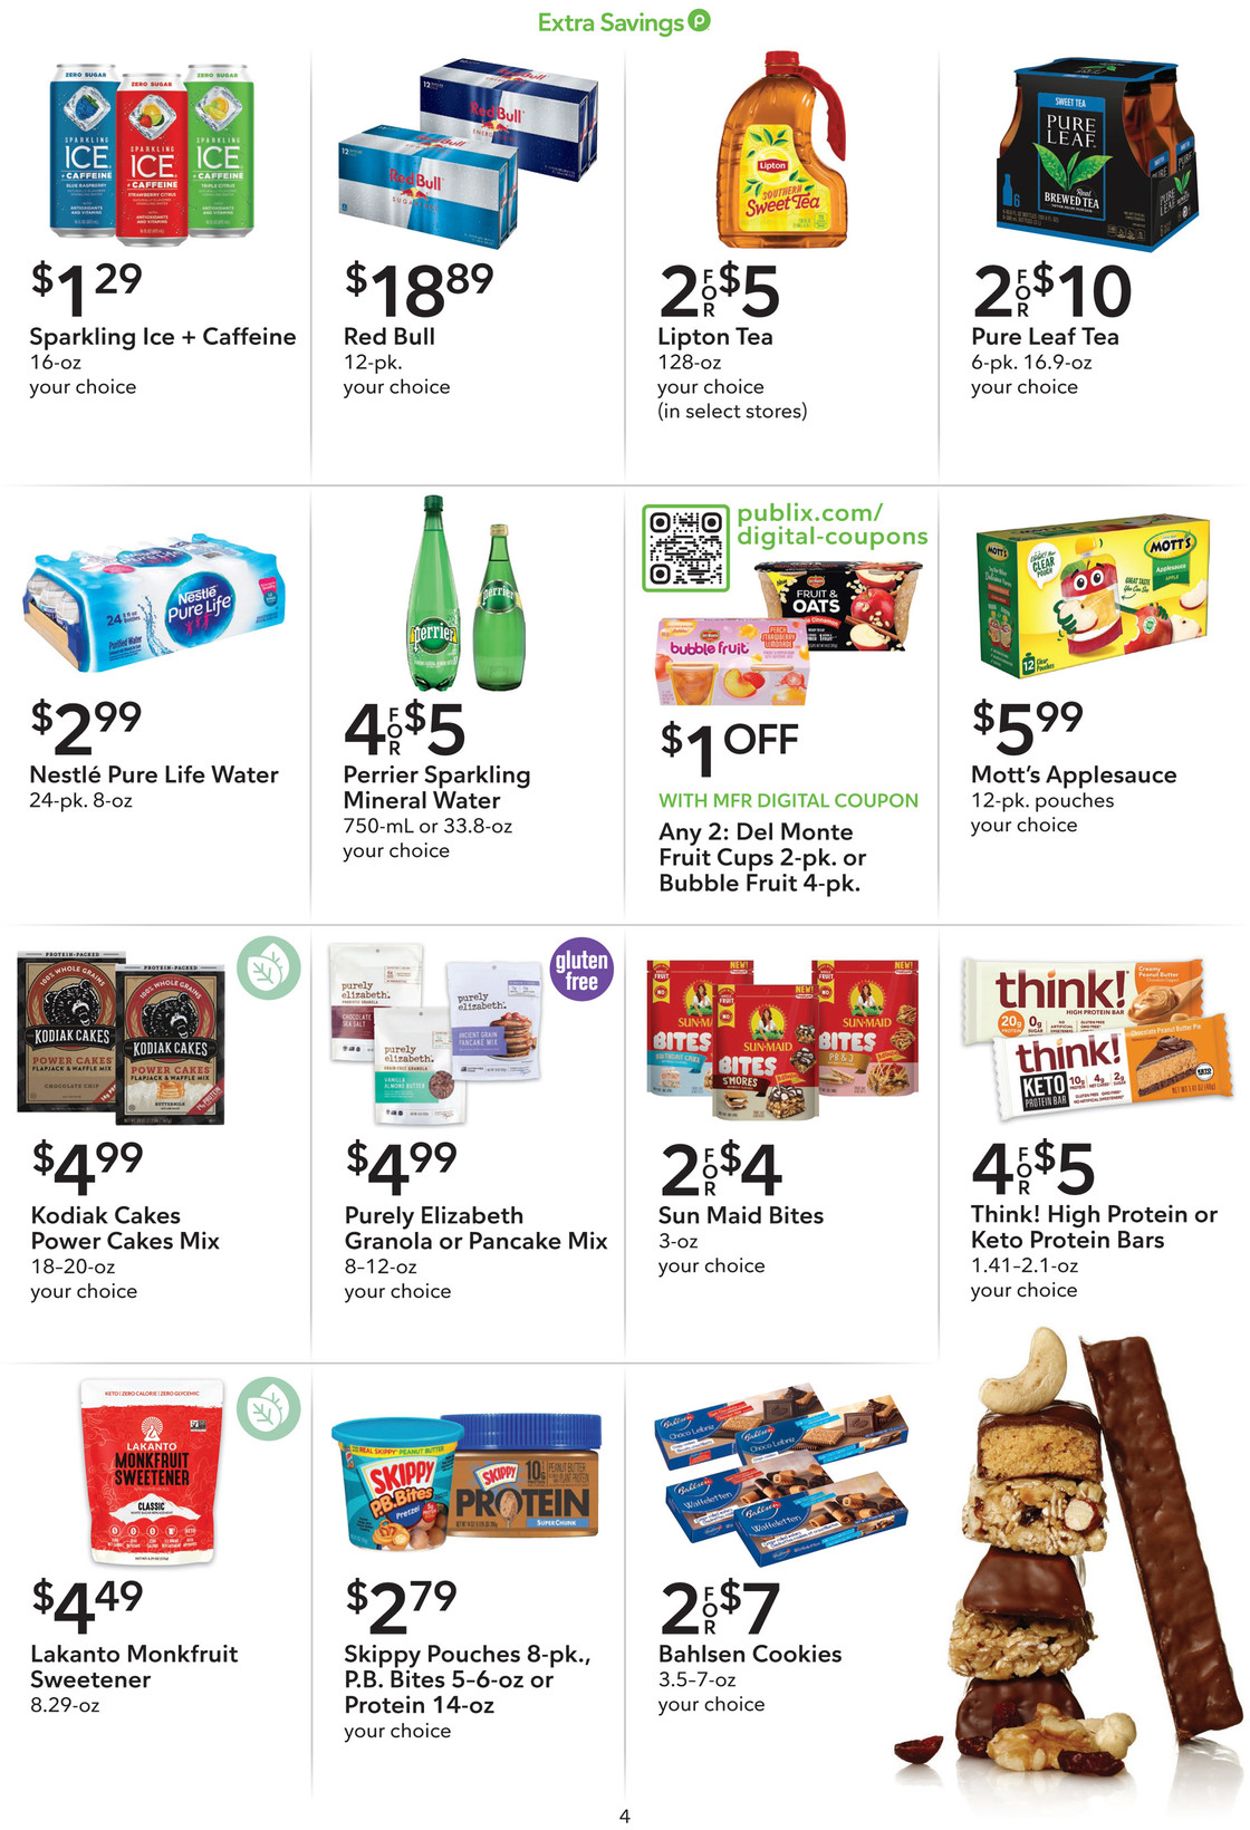 Publix Extra Savings 2021 Current weekly ad 01/02 01/15/2021 [4